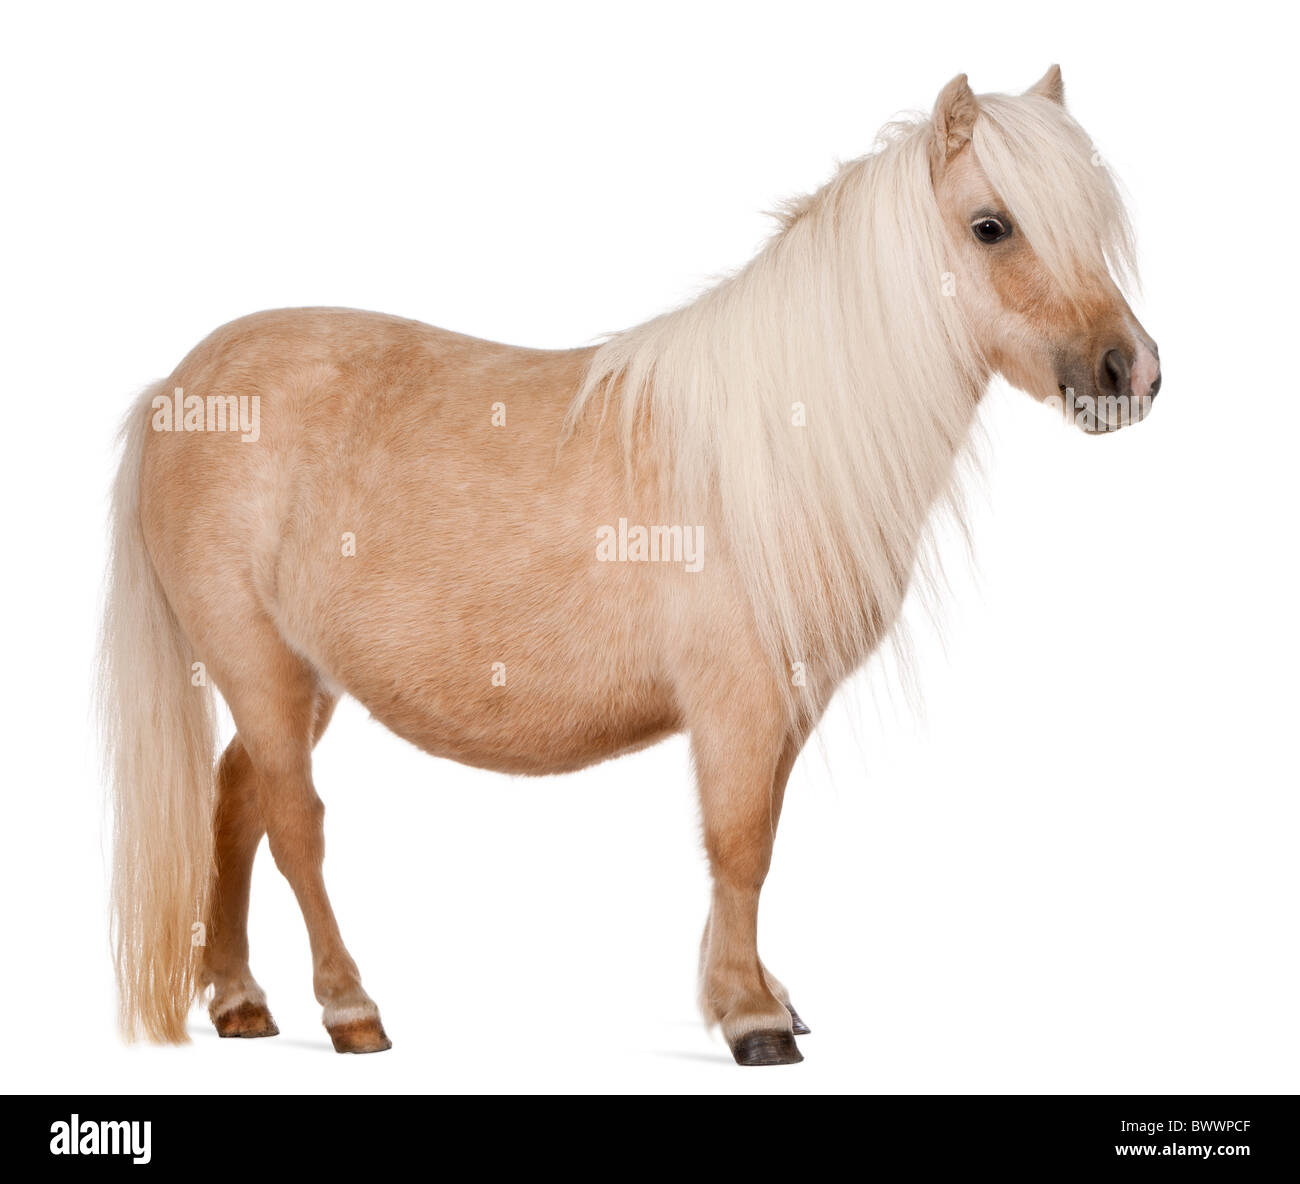 Palomino Shetland pony, Equus caballus, 3 years old, standing in front of white background Stock Photo